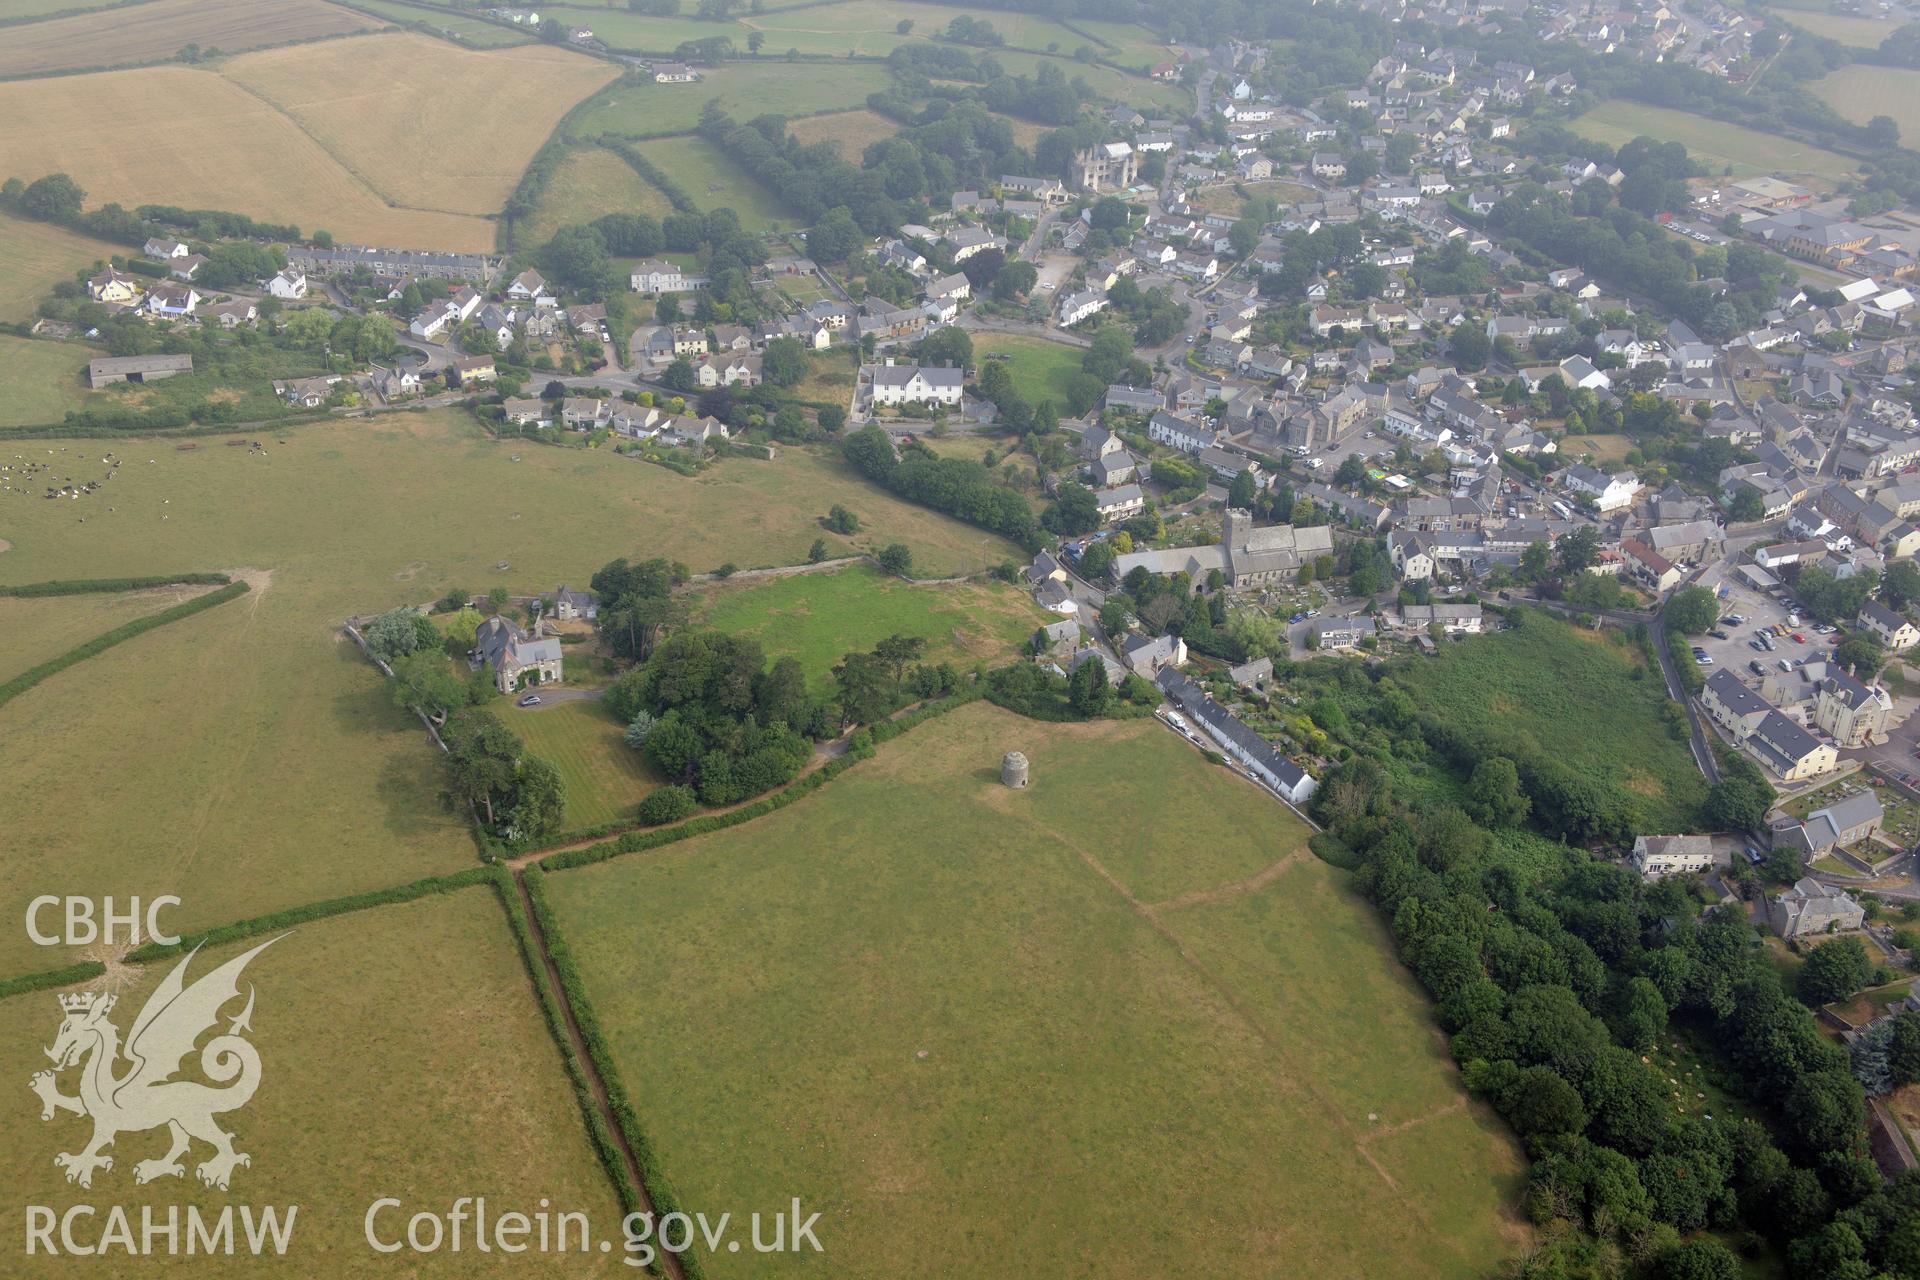 Royal Commission aerial photography of Llantwit Major recorded during drought conditions on 22nd July 2013.